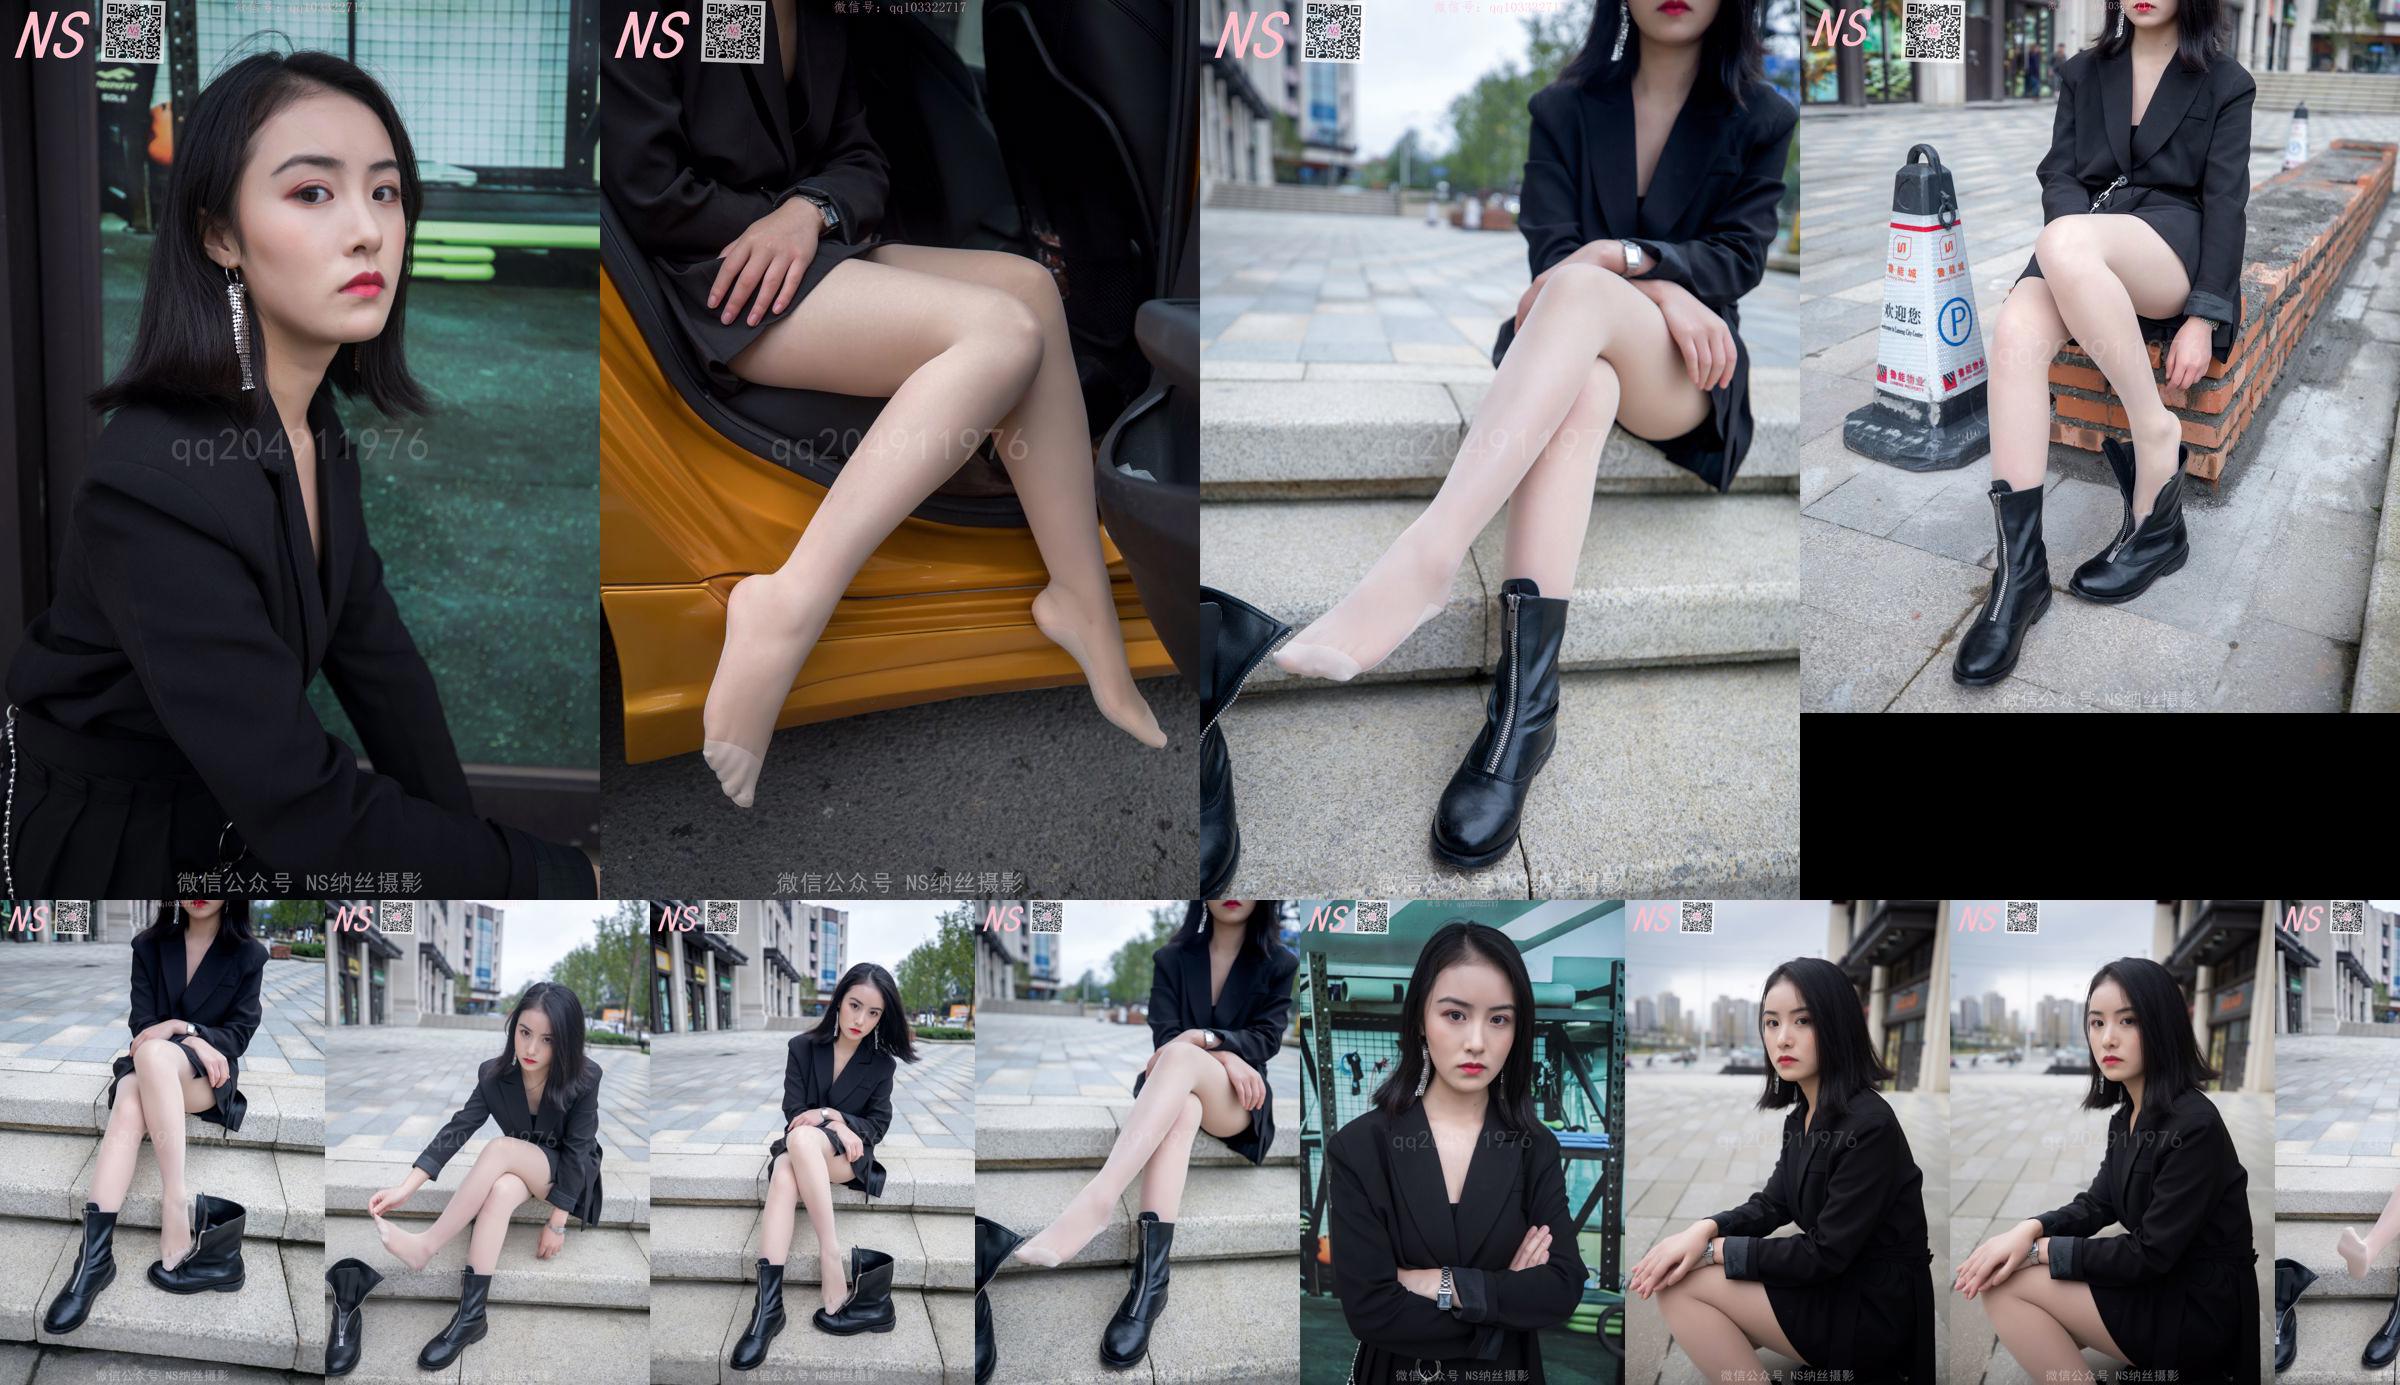 Yishuang "Special Wonderful Boots and Stockings" [Nass Photography] No.2a540c Page 3